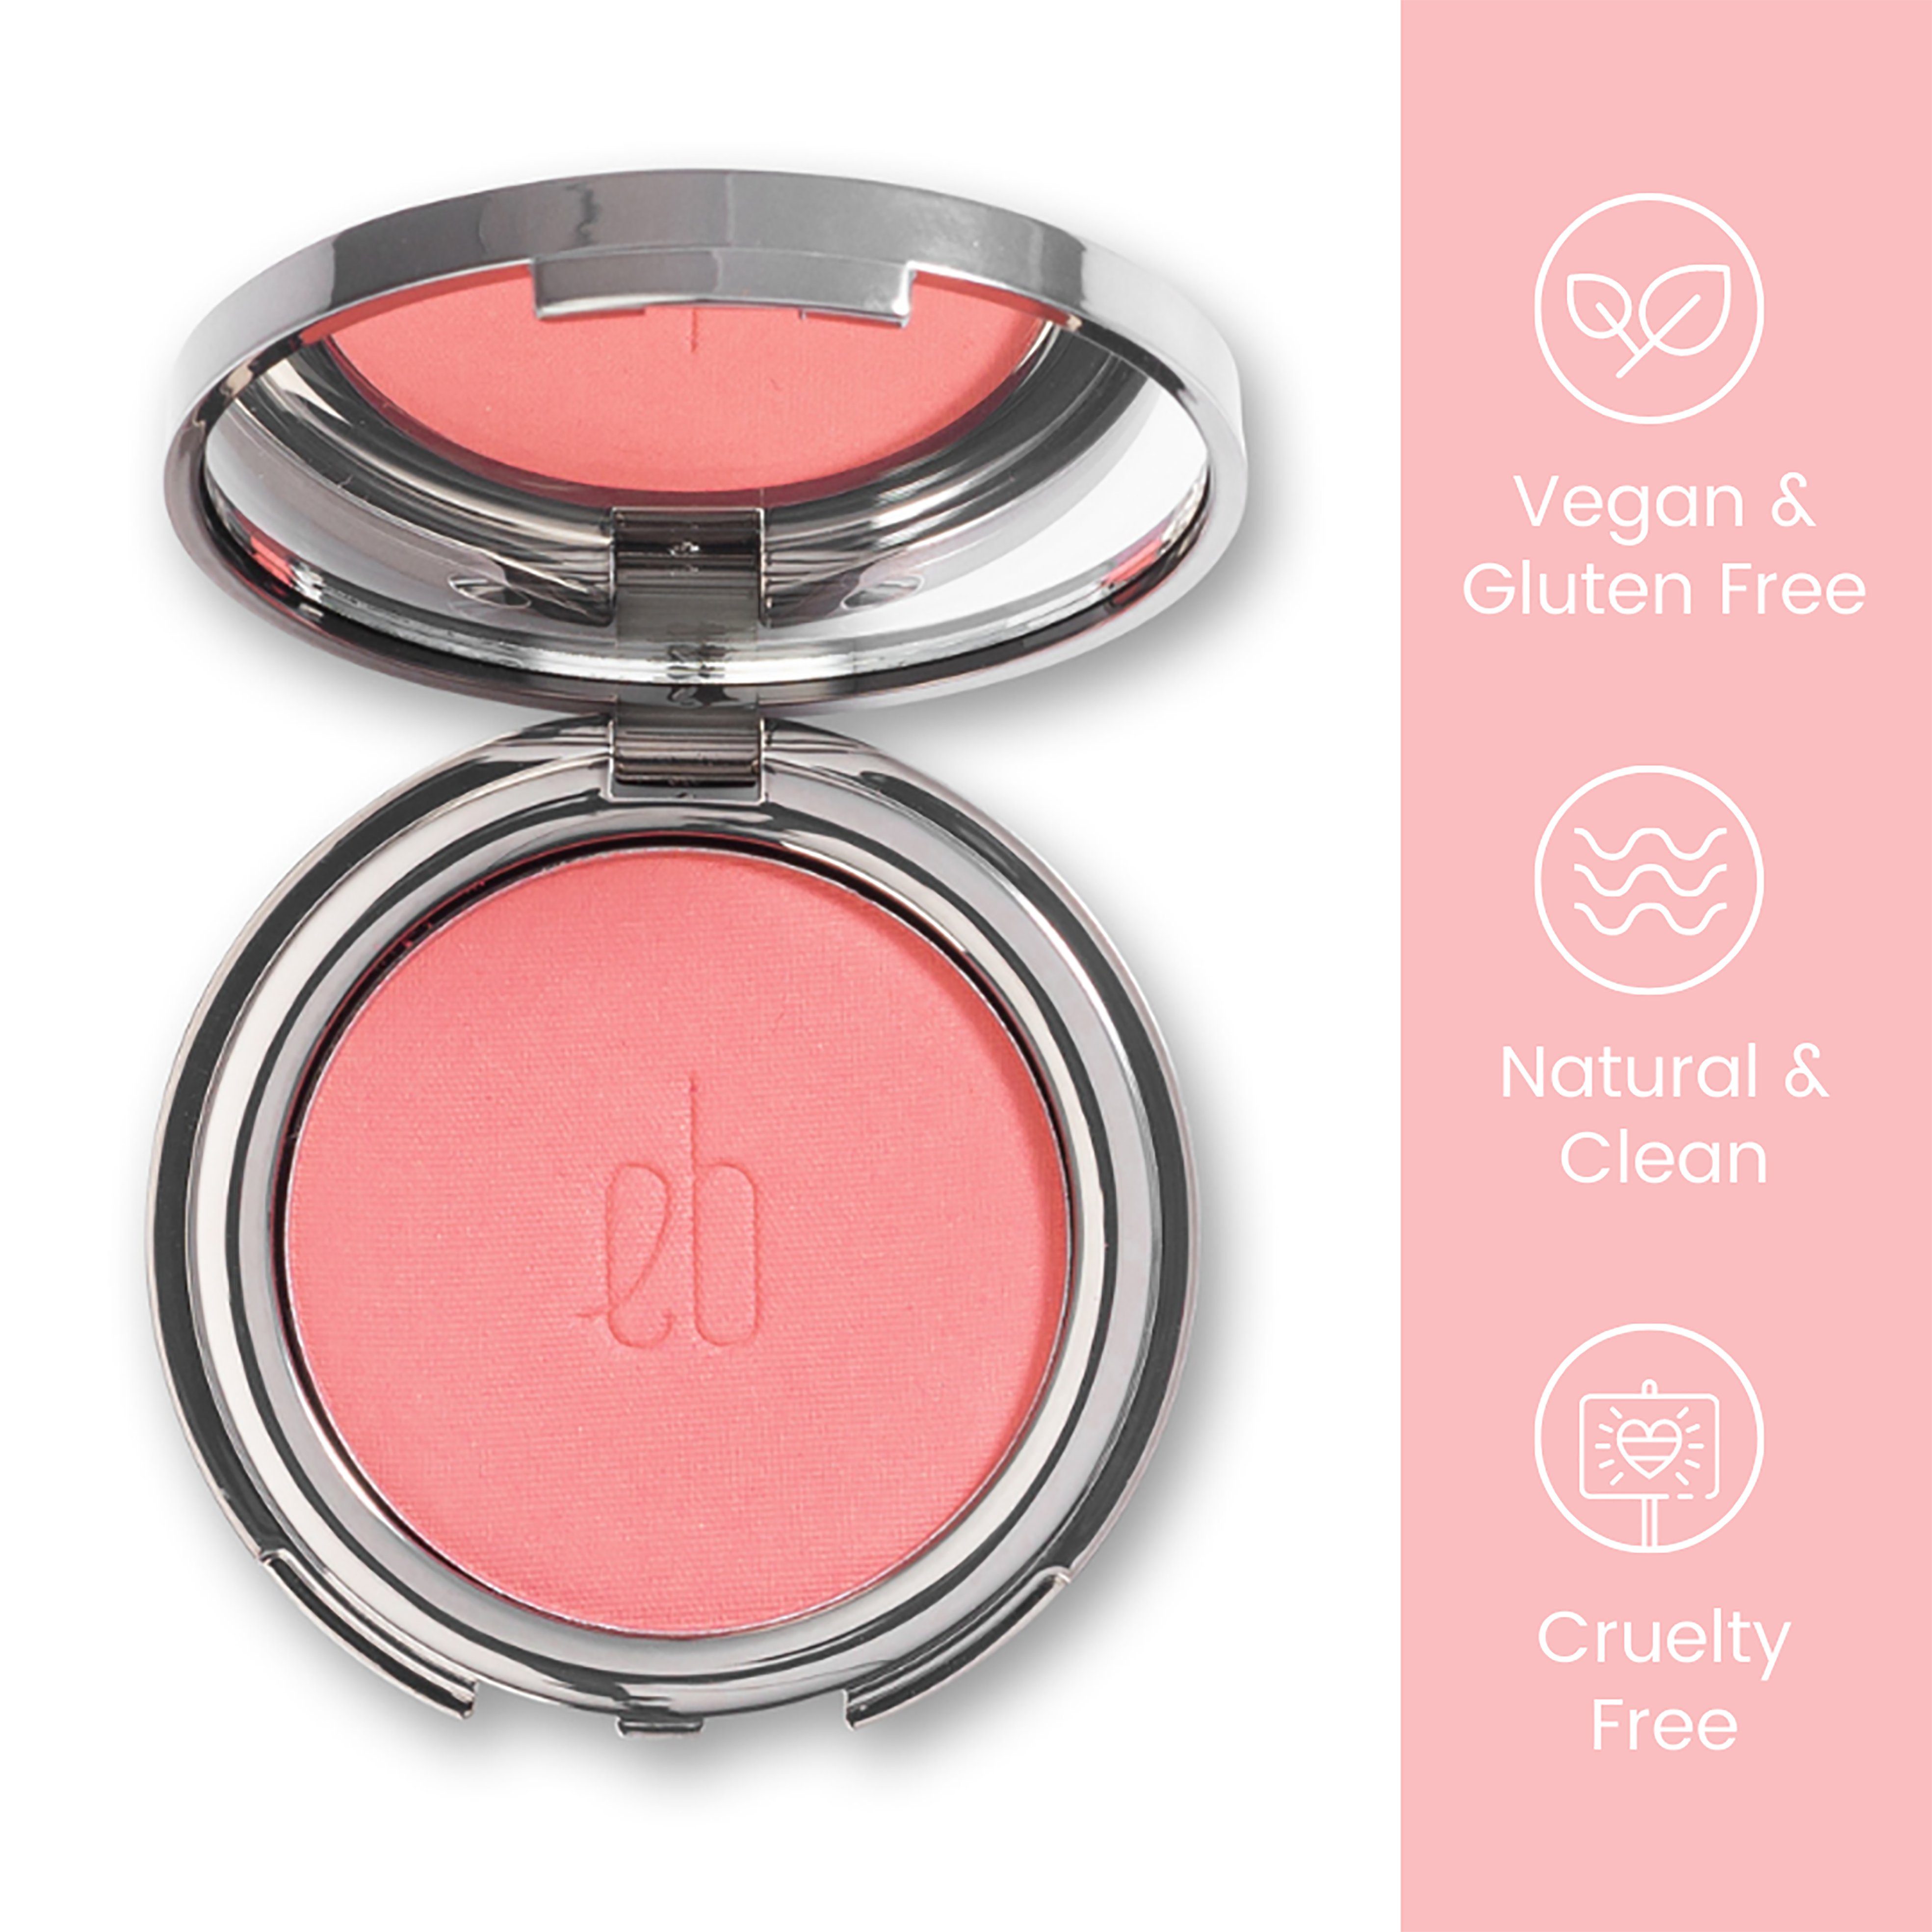 Rouge, Mineral Coral Veil frei, ETHEREAL Clean, Natural, Veil BEAUTY® Desire Vegan, Mineral Langhaltend Rouge-Palette Gluten Blush,